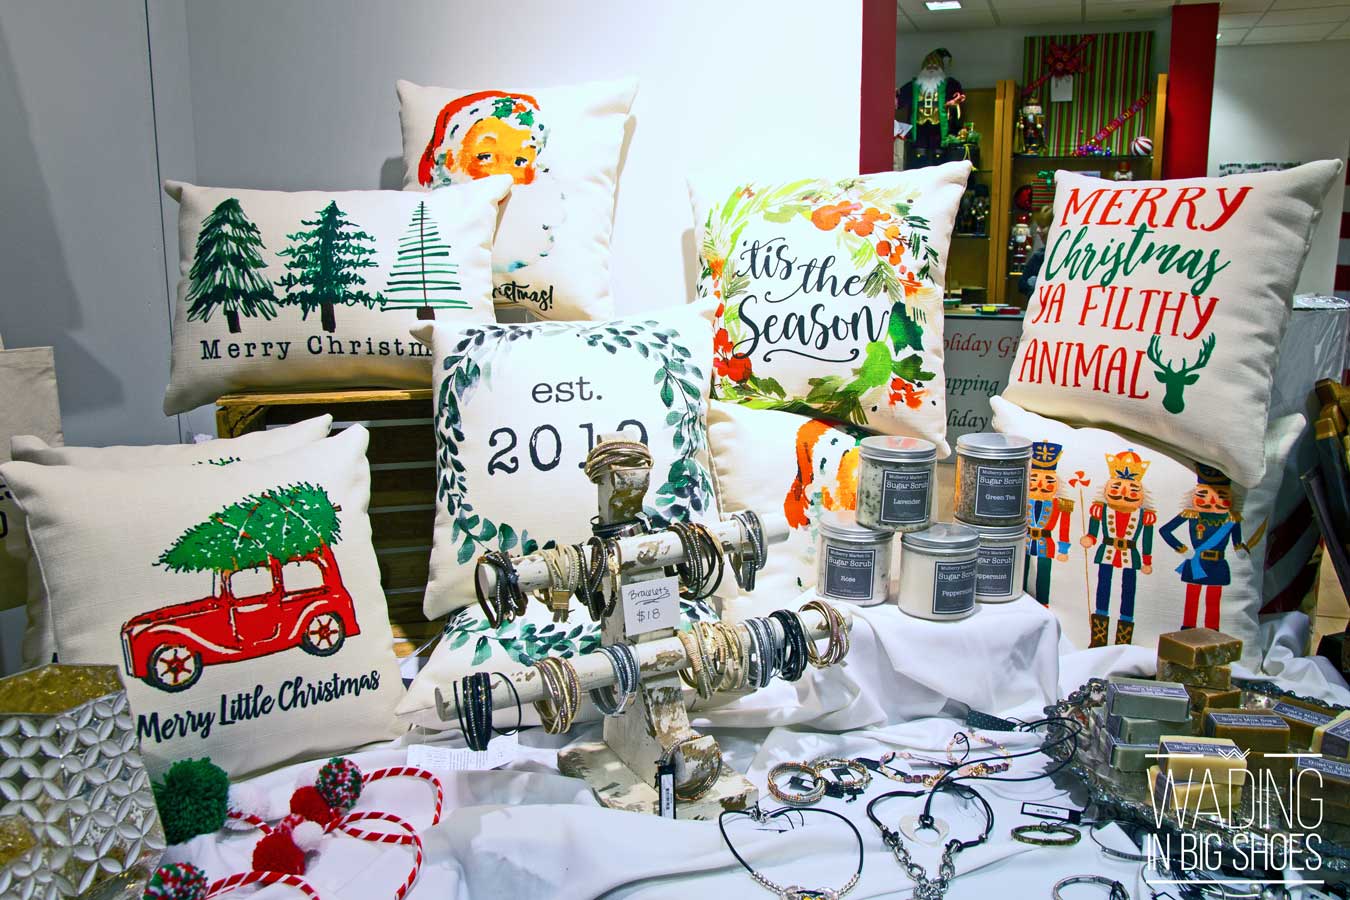  Holiday Headquarters At The GMRENCEN Encourages Detroiters To Shop Local | via Wading in Big Shoes